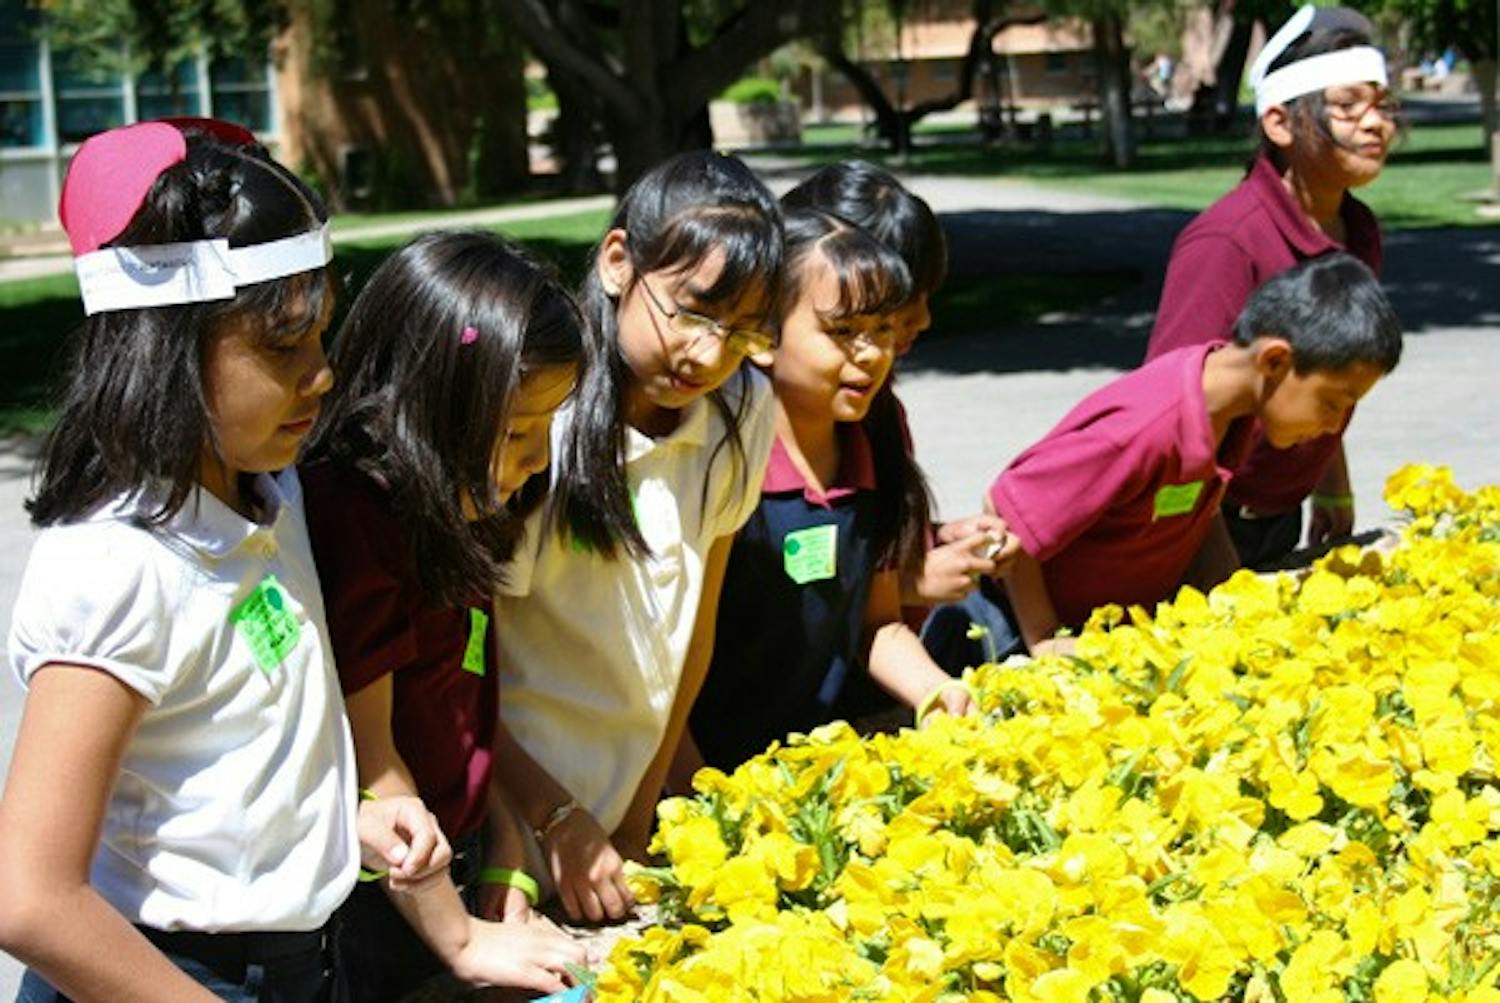 PLAY TIME: Students from Creighton Elementary School in Phoenix play at a lunch break during their visit to the ASU Tempe campus earlier in the week. (Photo by Lisa Bartoli)